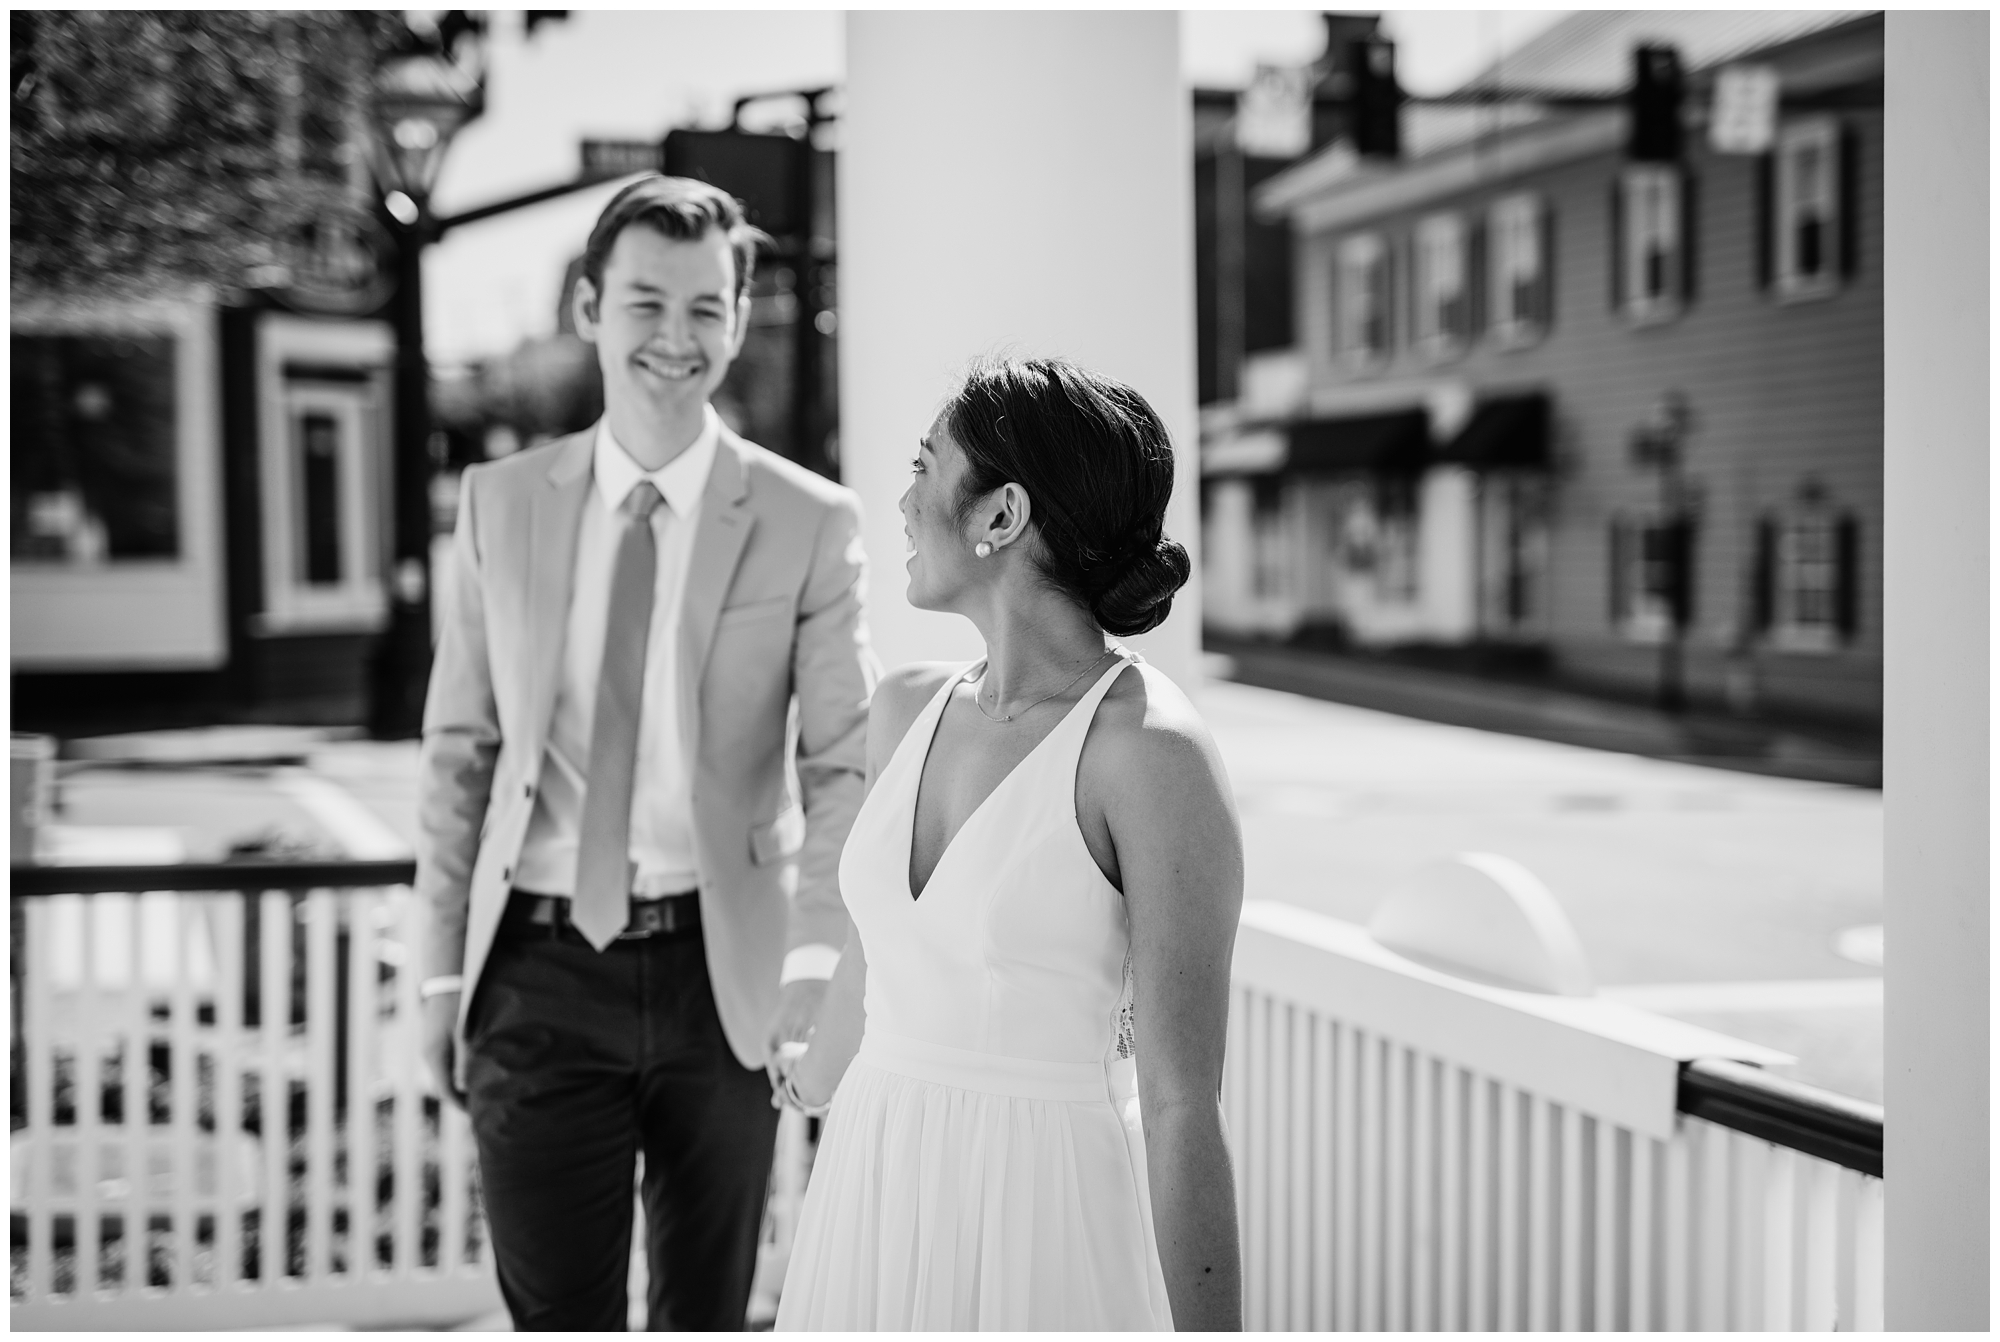 Courthouse Wedding, Intimate Elopement in Northern Virginia